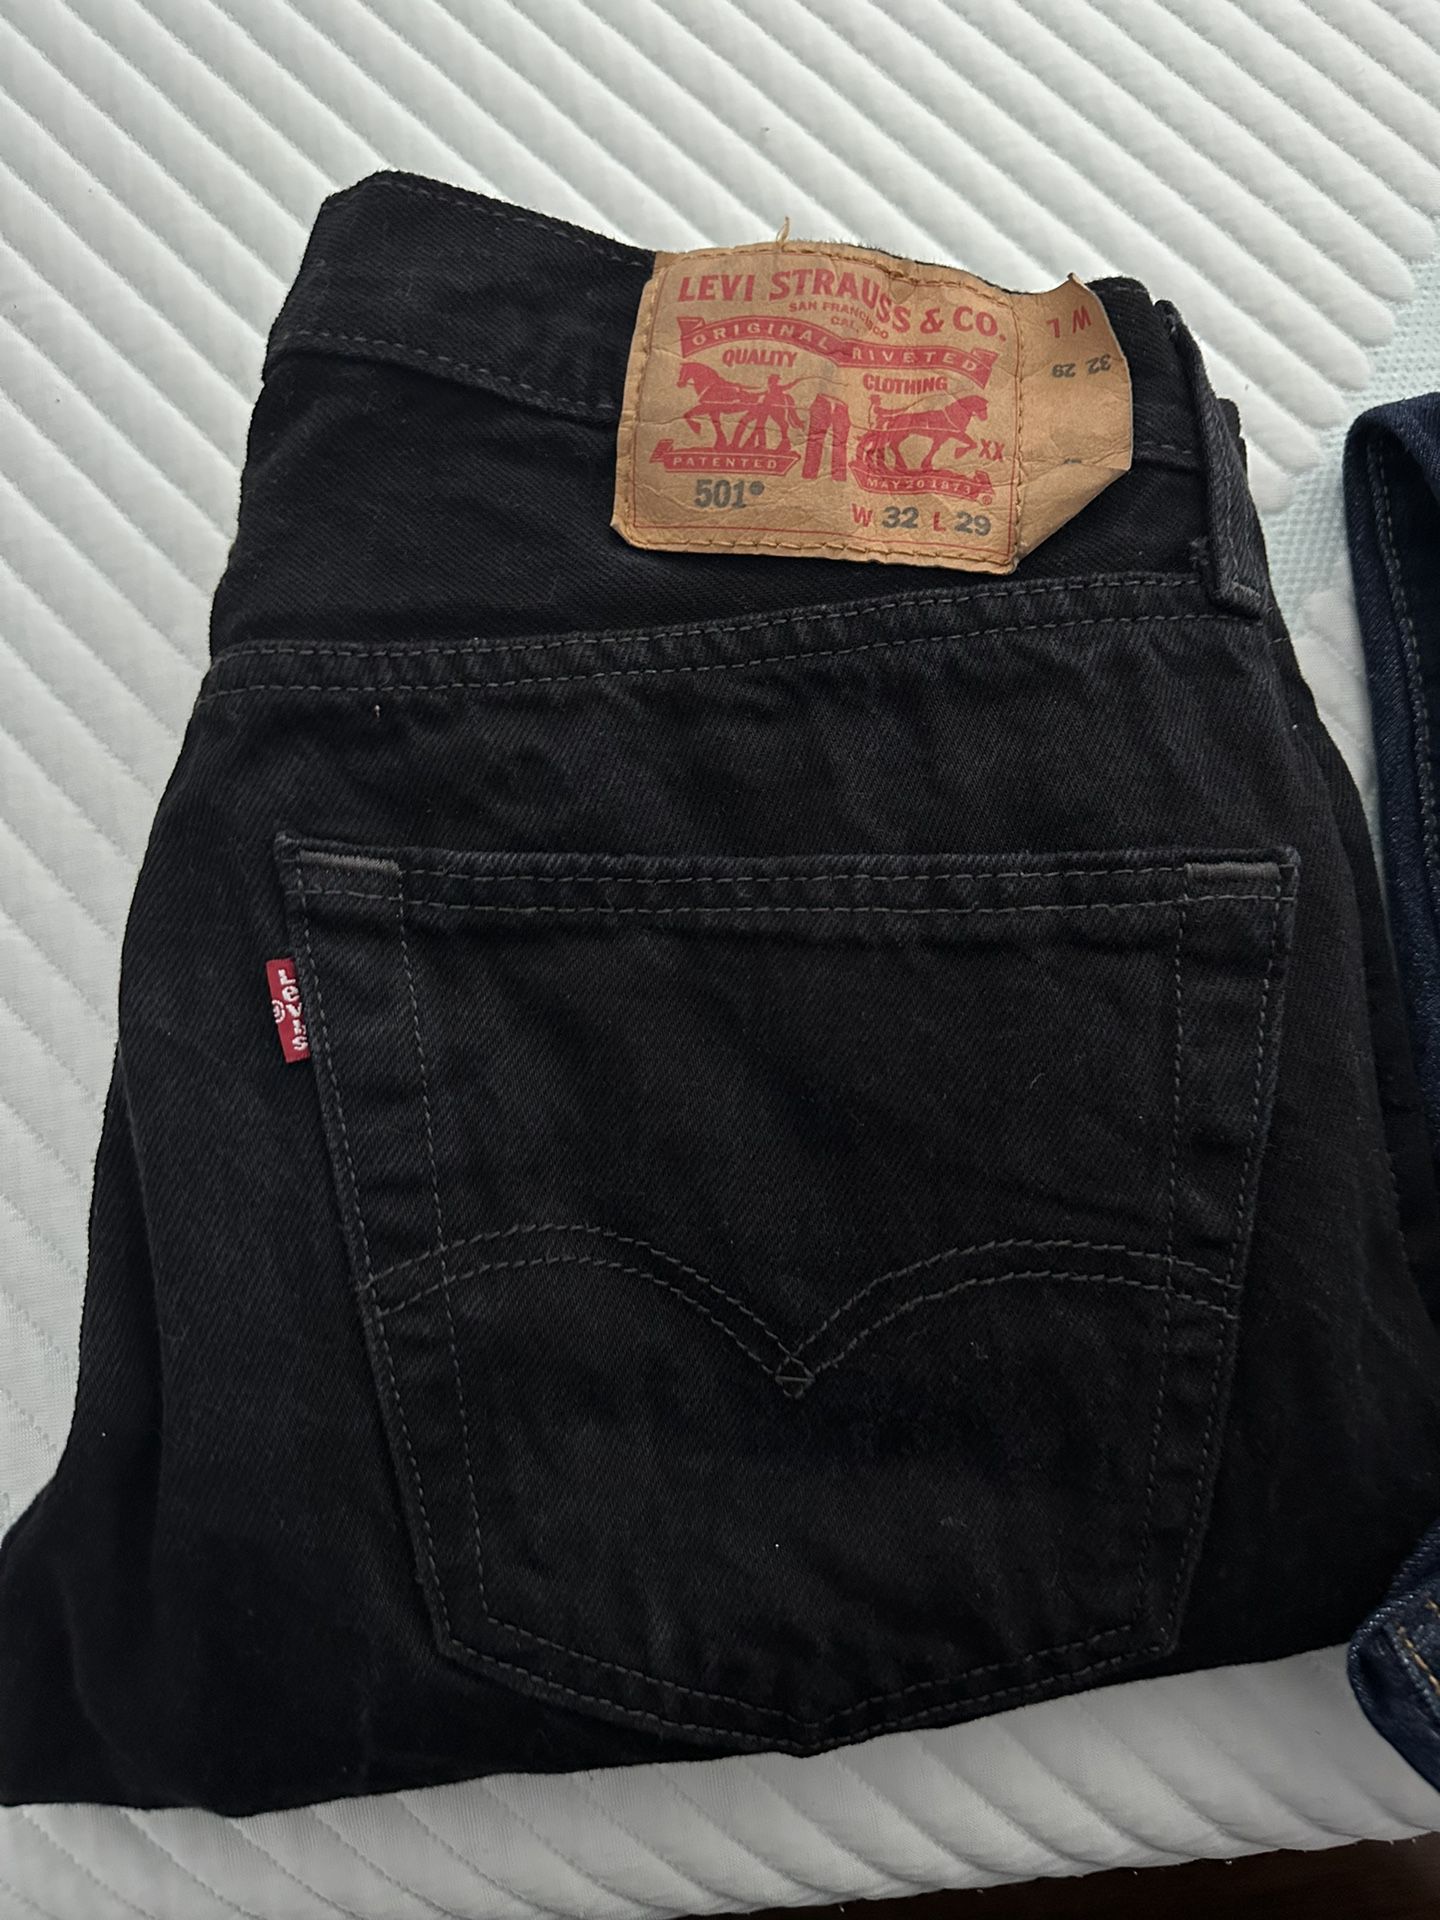 501 Levi jeans for Sale in Fresno, CA - OfferUp